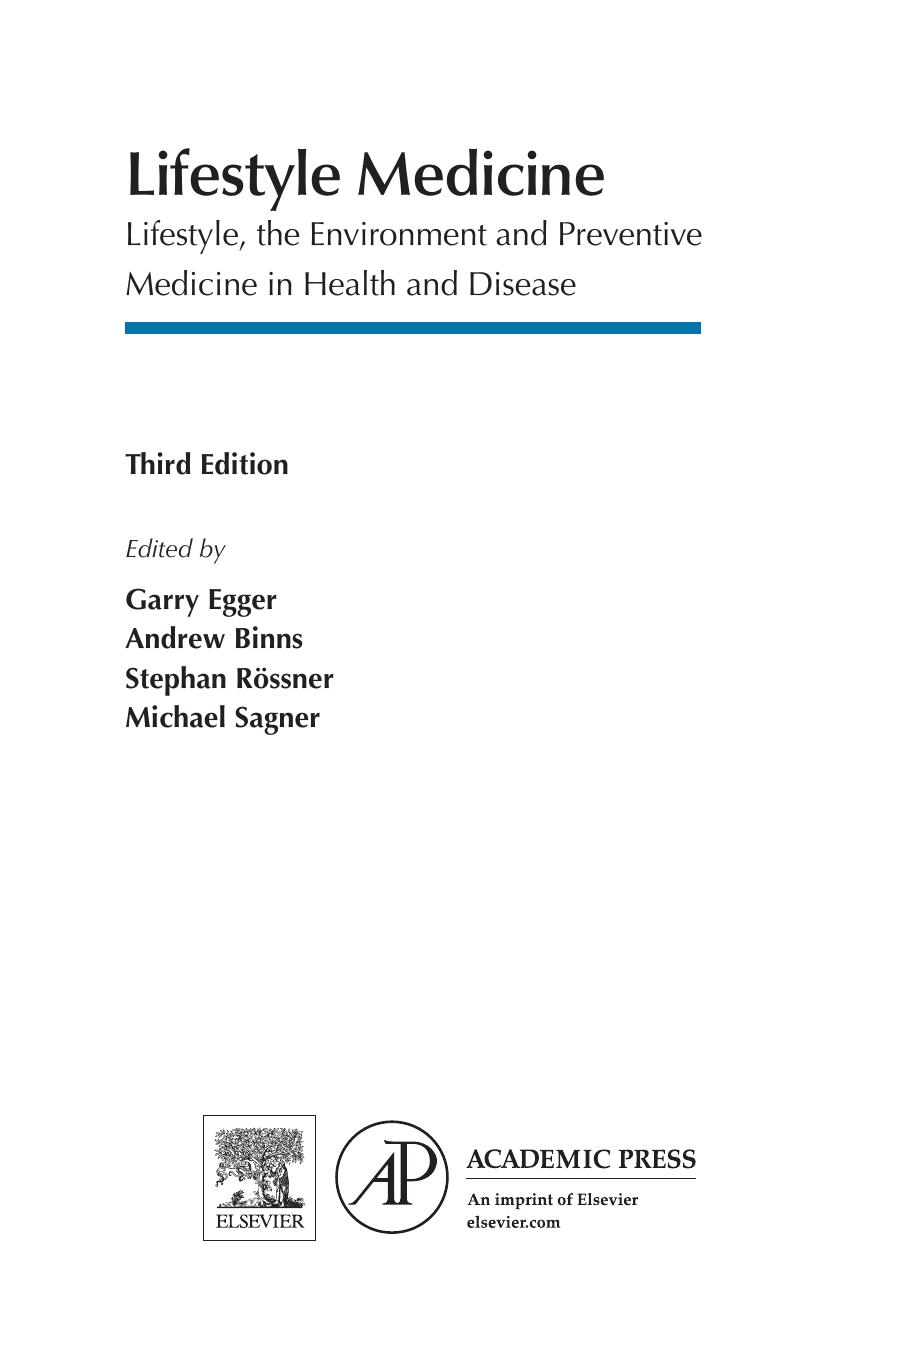 Lifestyle Medicine. Lifestyle, the Environment and Preventive Medicine in Health and Disease 3rd ed 2017